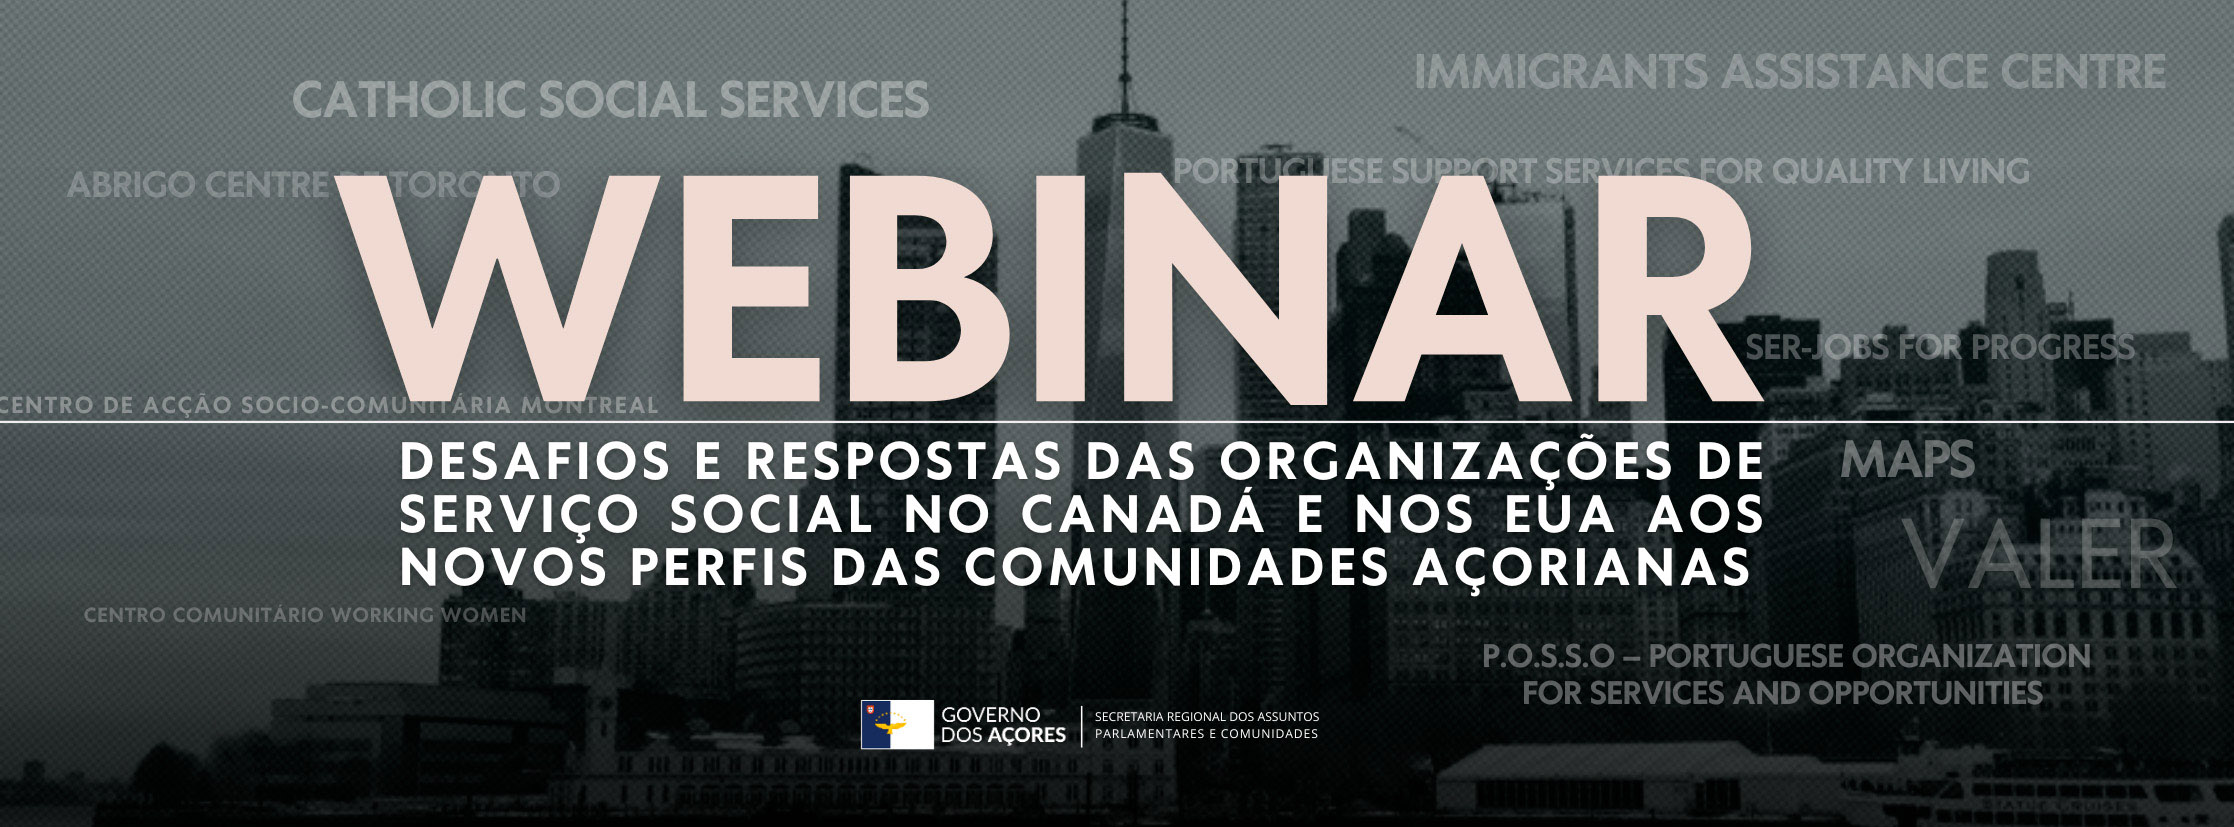 Webinar discusses challenges to social work organisations in Azorean communities of North America